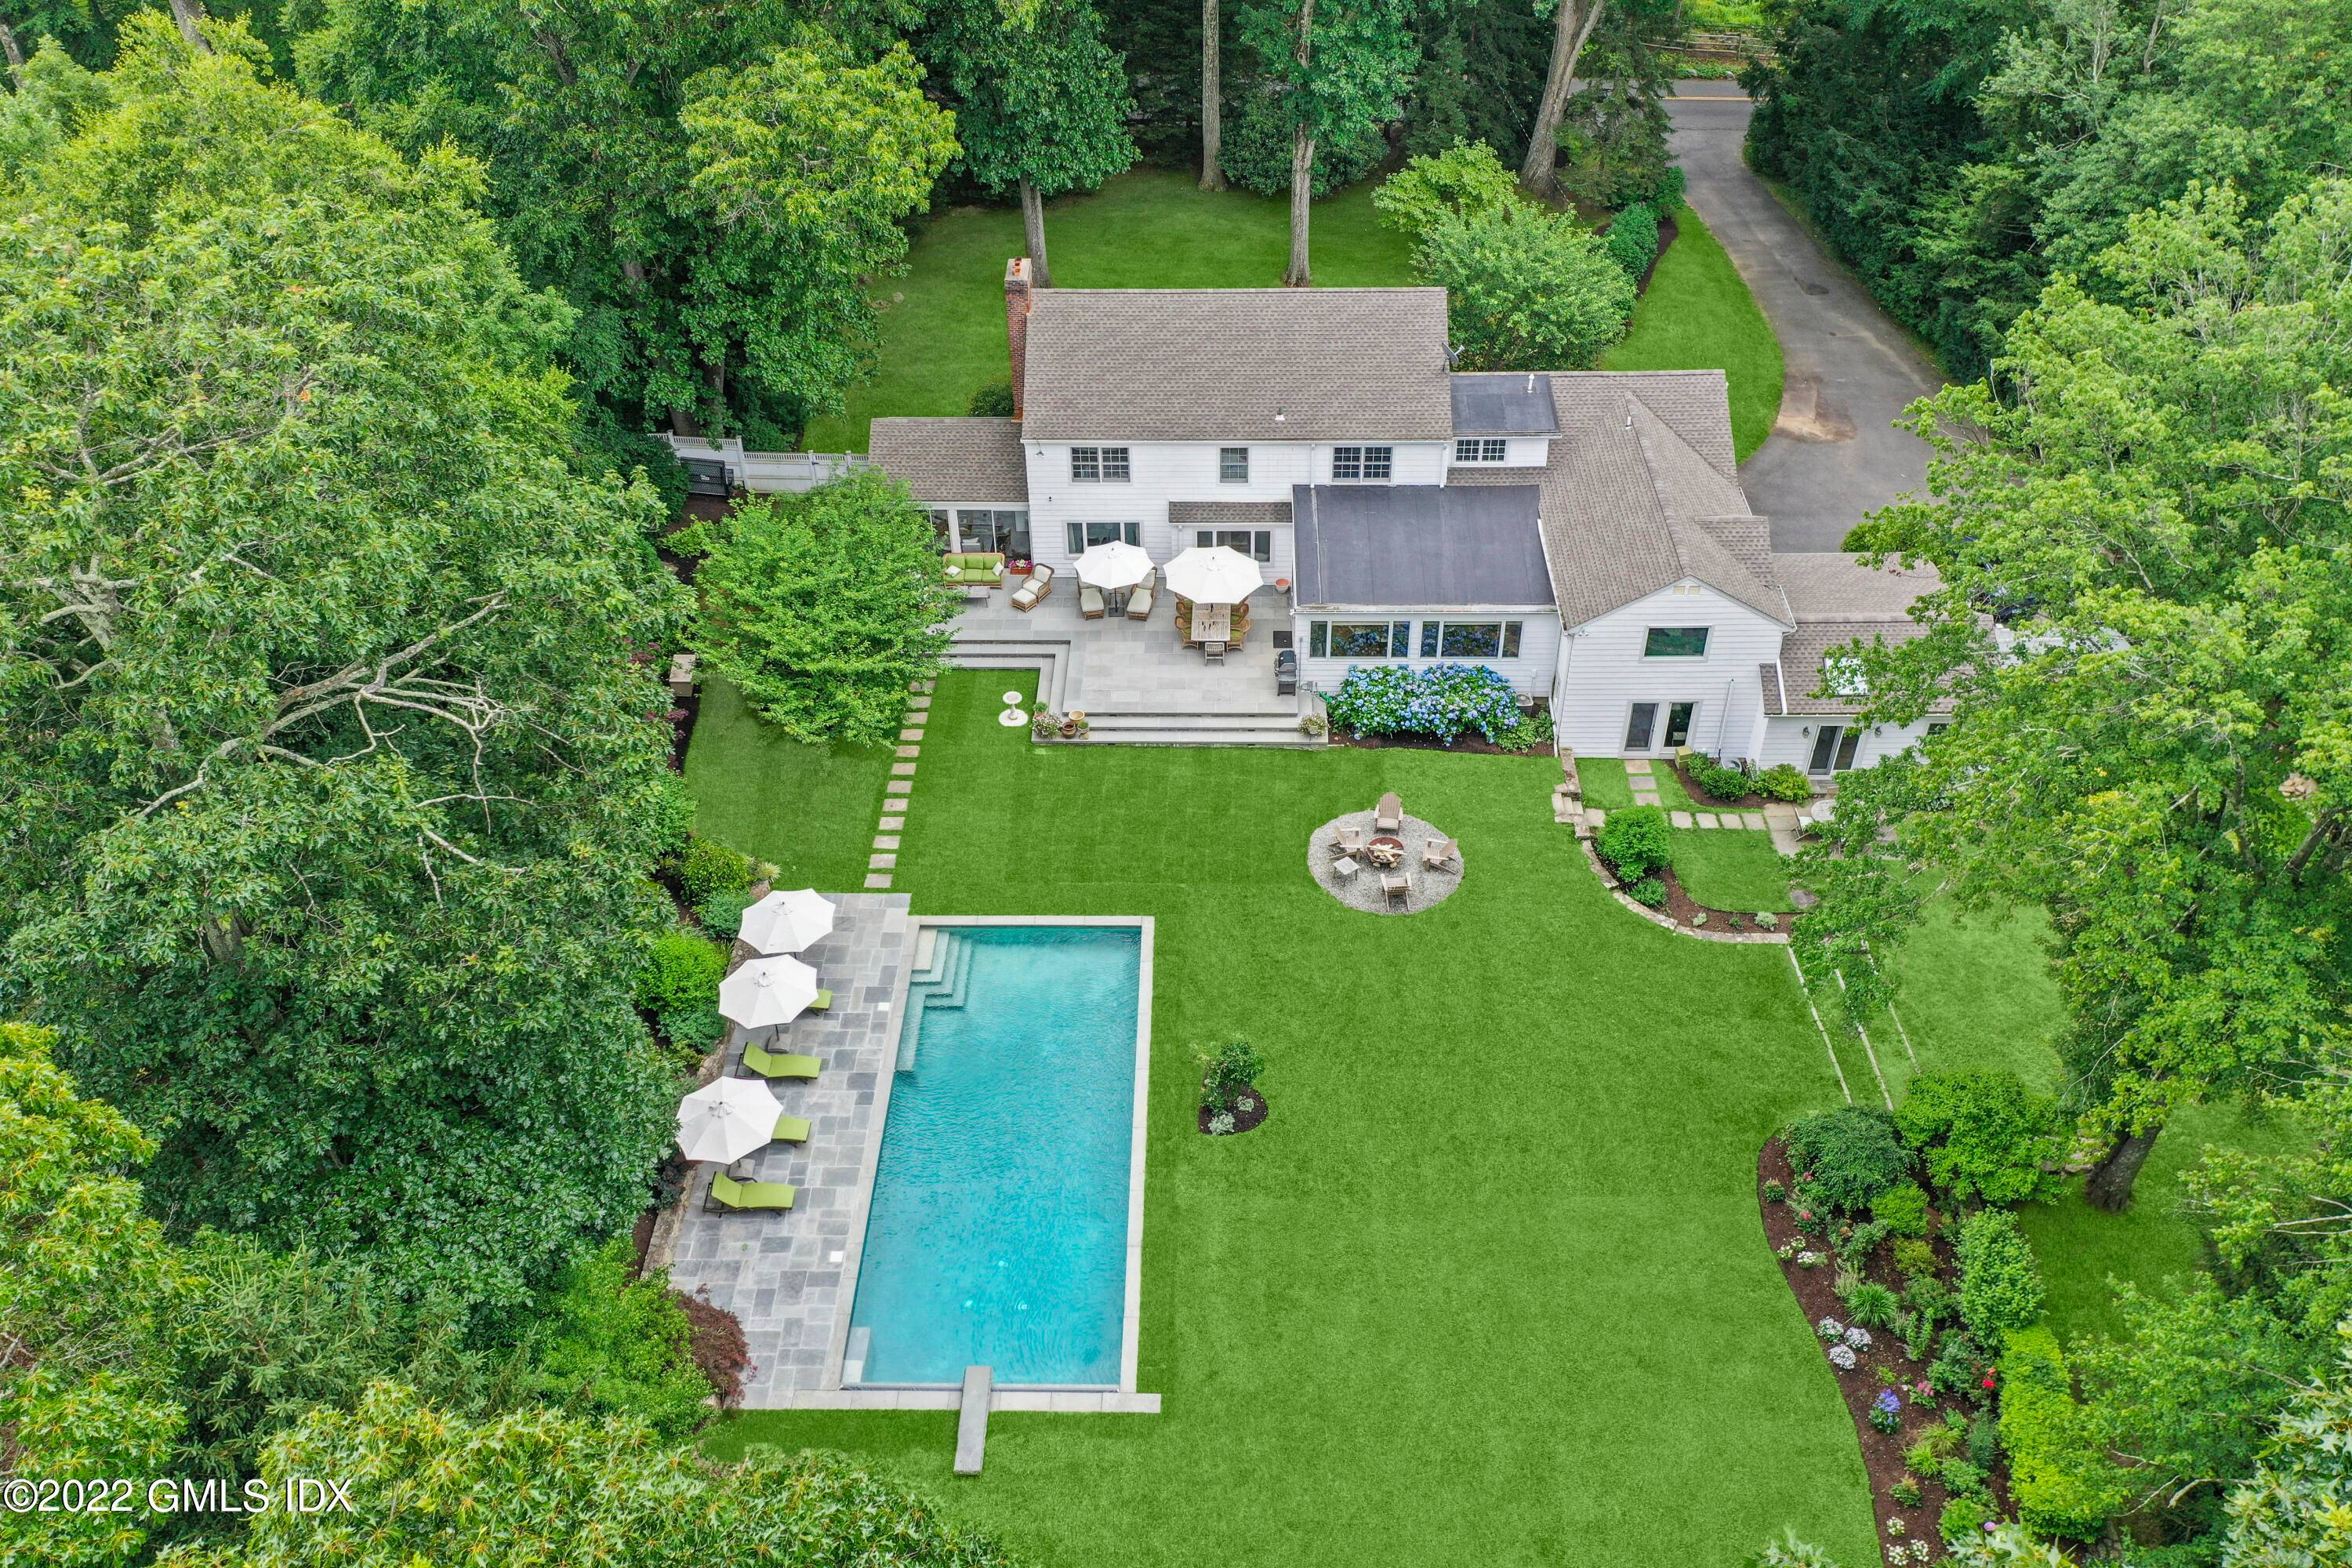 Private backyard retreat with pool, stone terrace, fenced in yard and stylish six bedroom Colonial set back on two Mid Country acres.